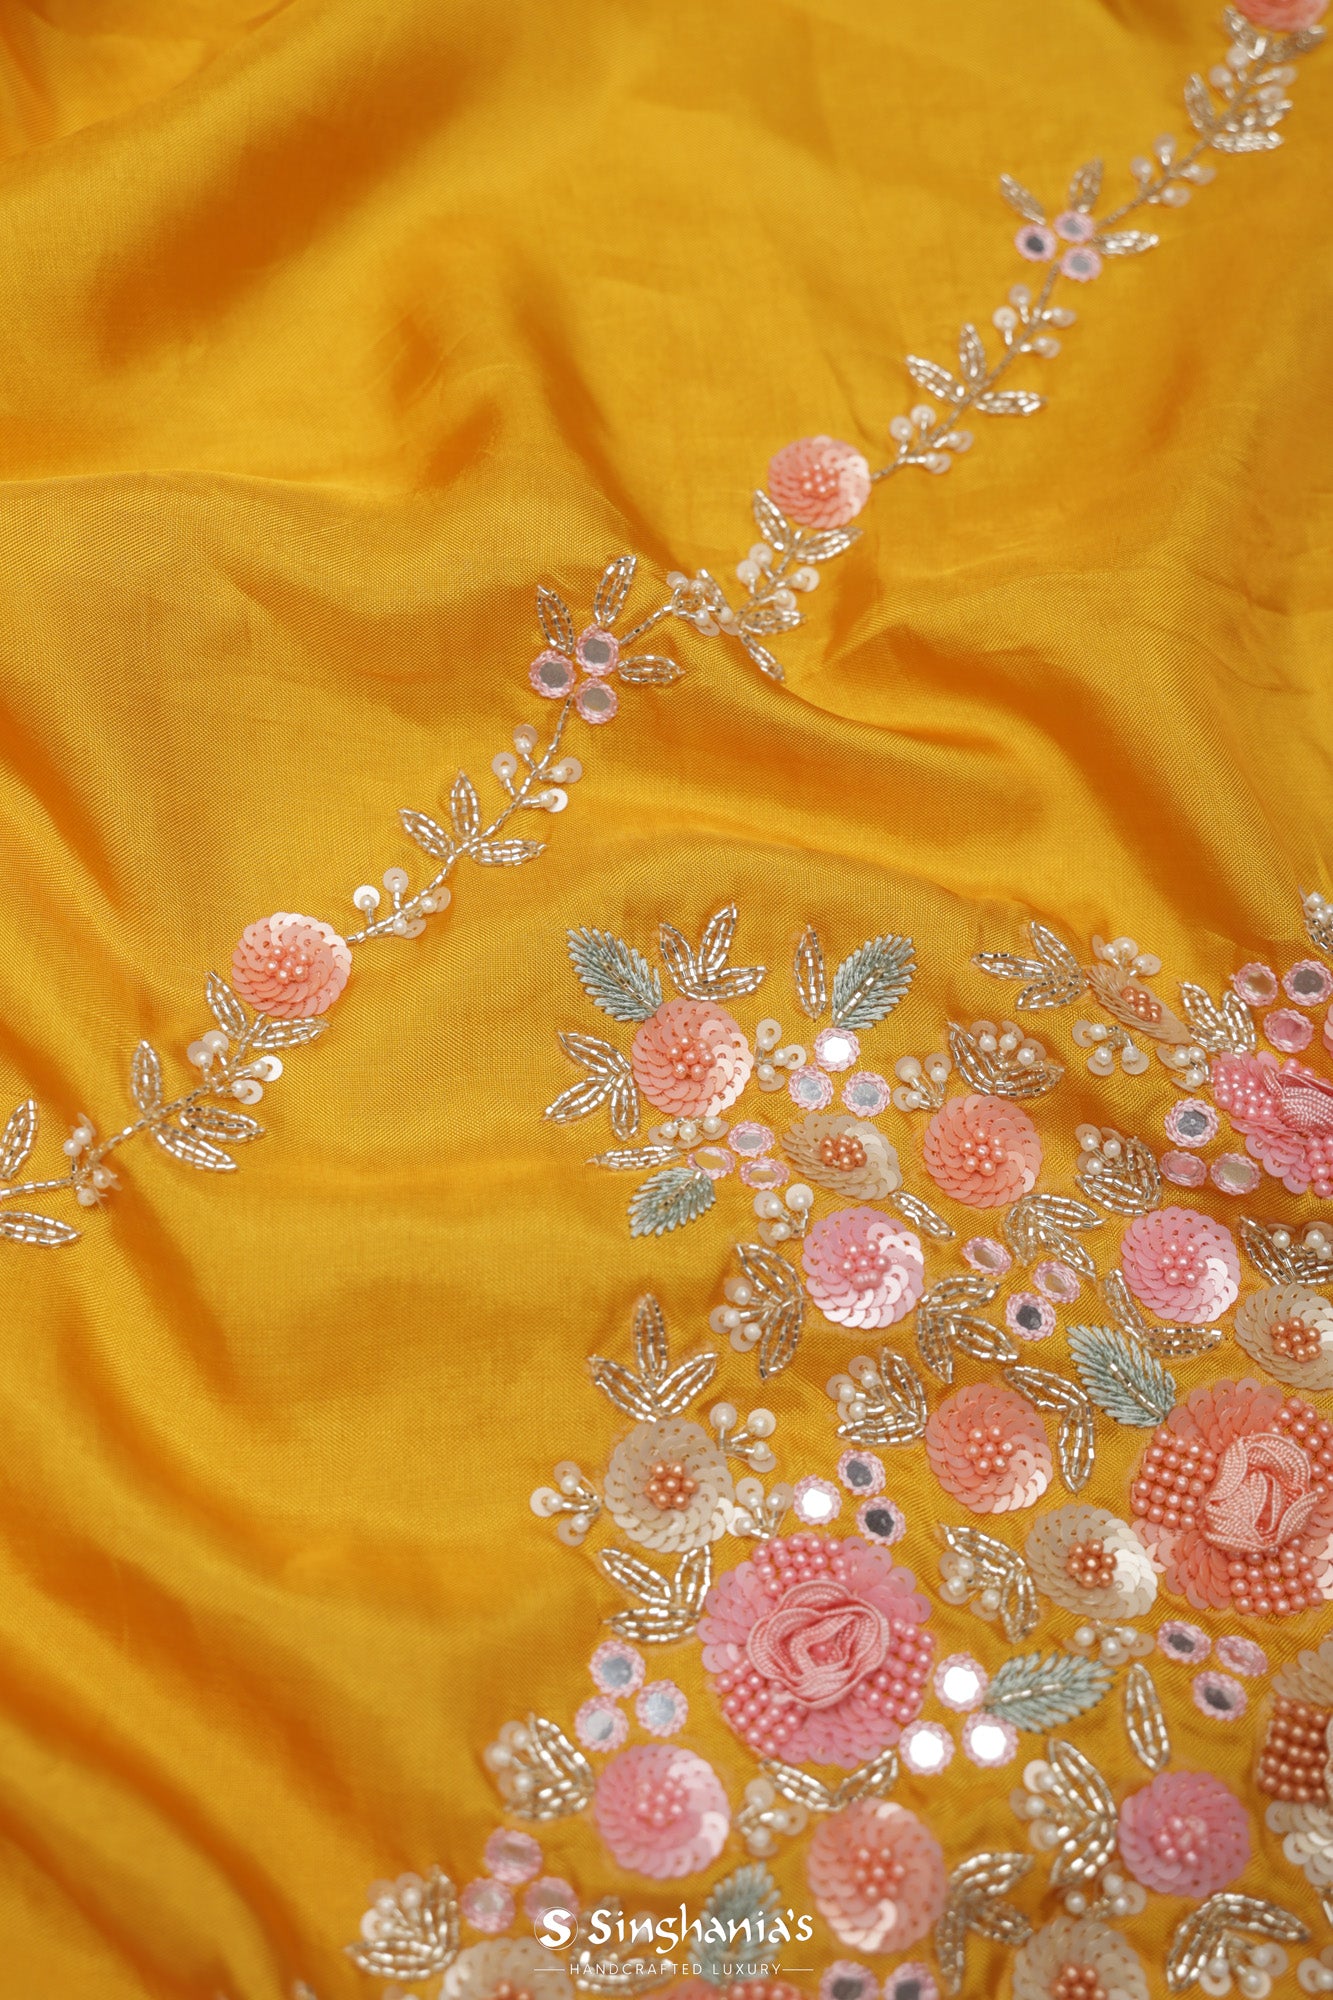 Vibrant Yellow Satin Saree With Floral Stripes Embroidery